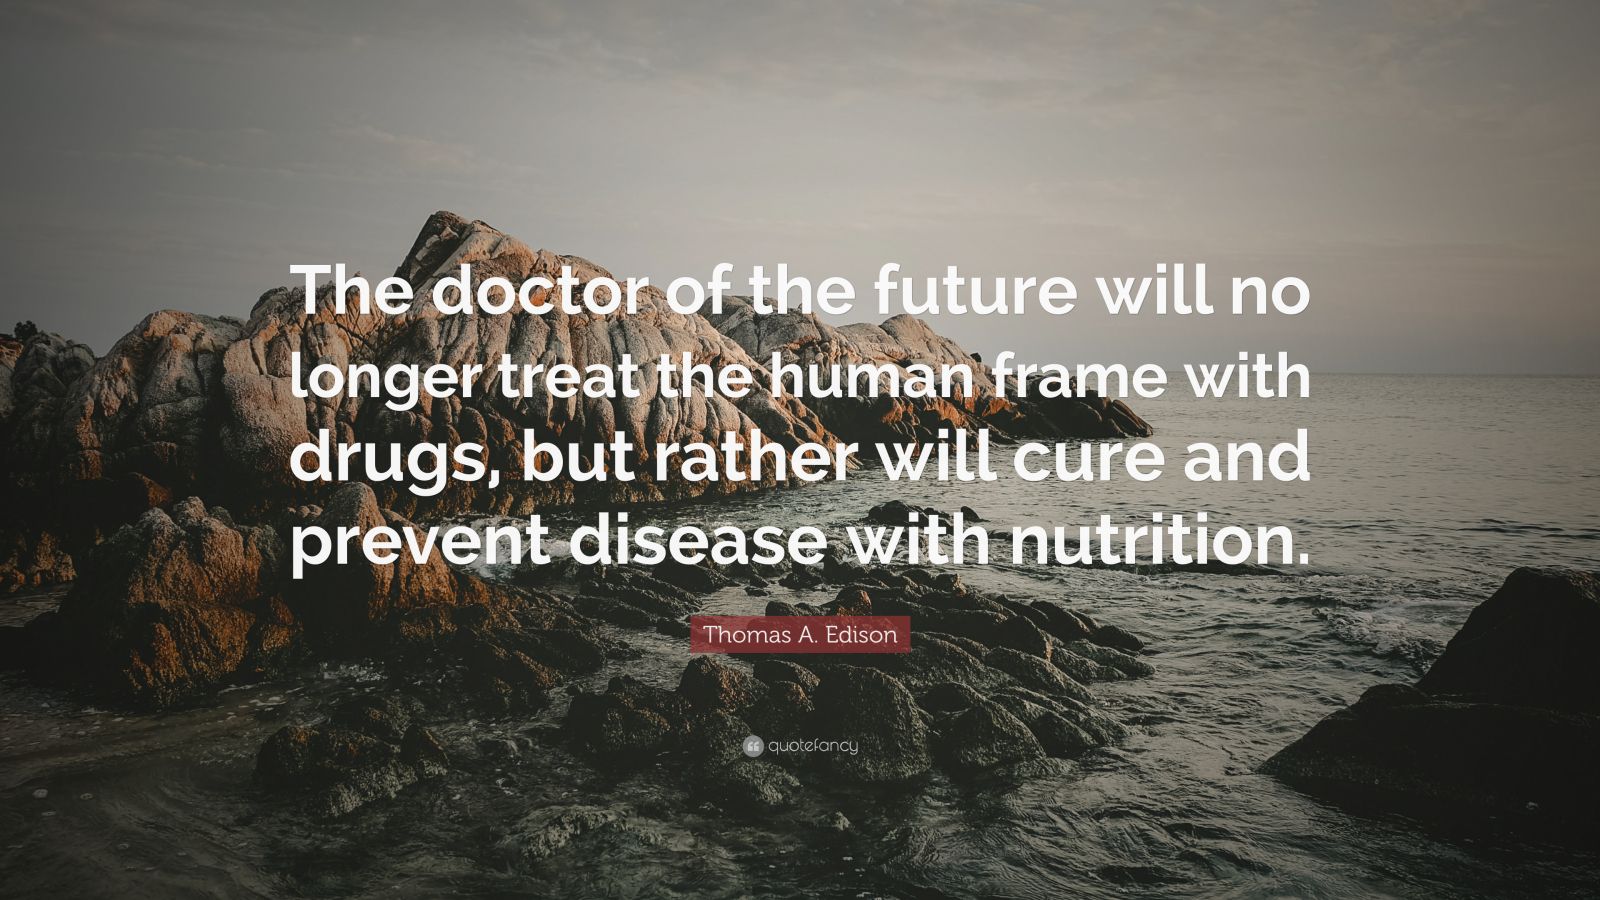 Thomas A. Edison Quote: "The doctor of the future will no longer treat the human frame with ...